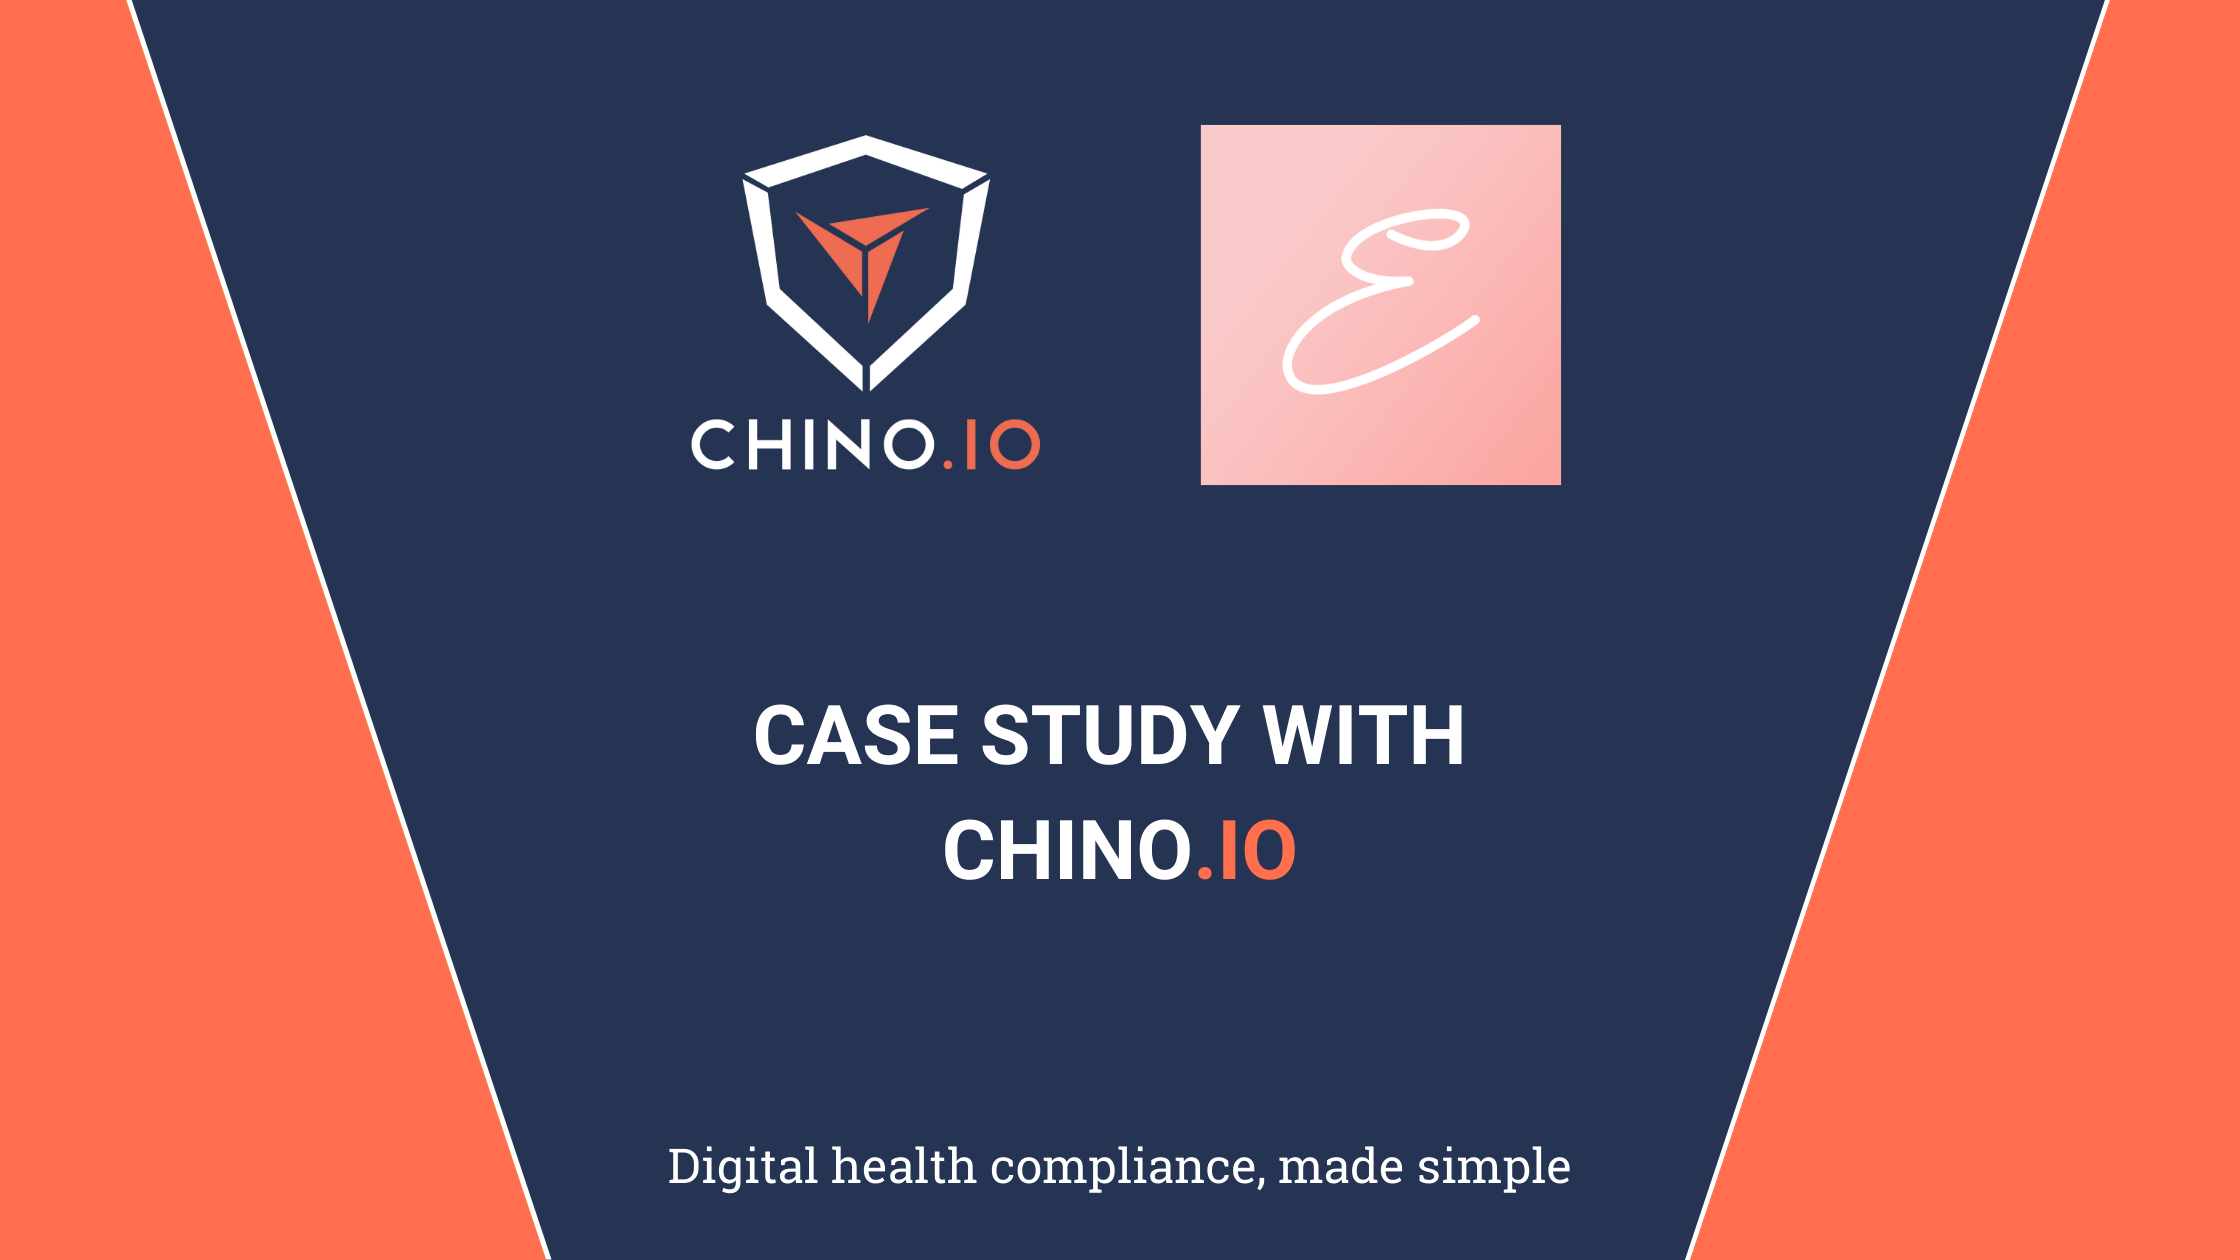 From zero to market: how to build and launch a compliant digital health app in 1 year